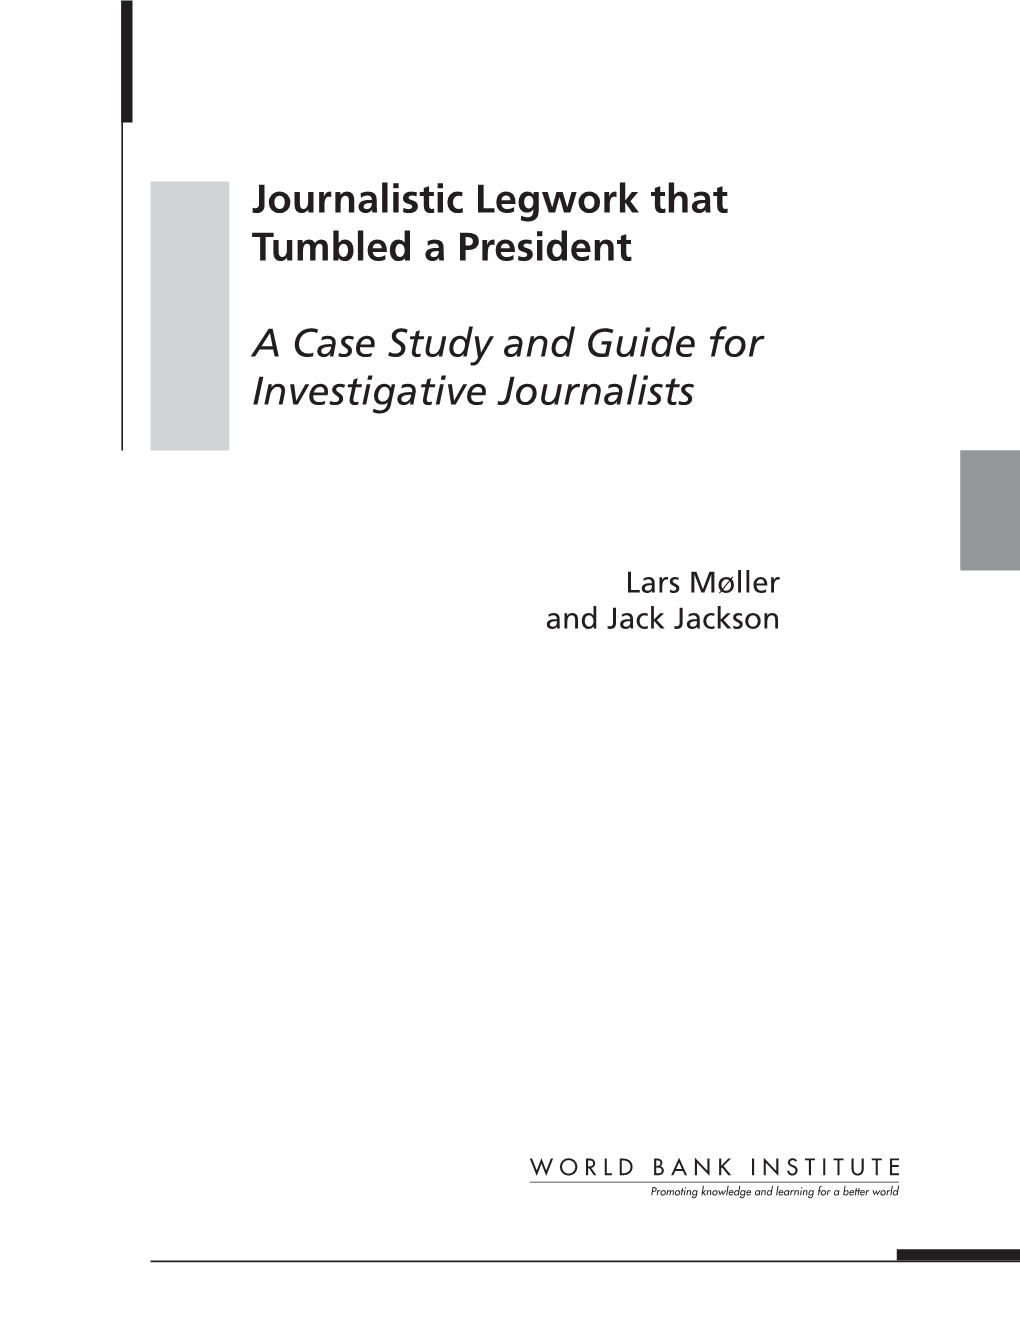 Journalistic Legwork That Tumbled a President a Case Study and Guide for Investigative Journalists